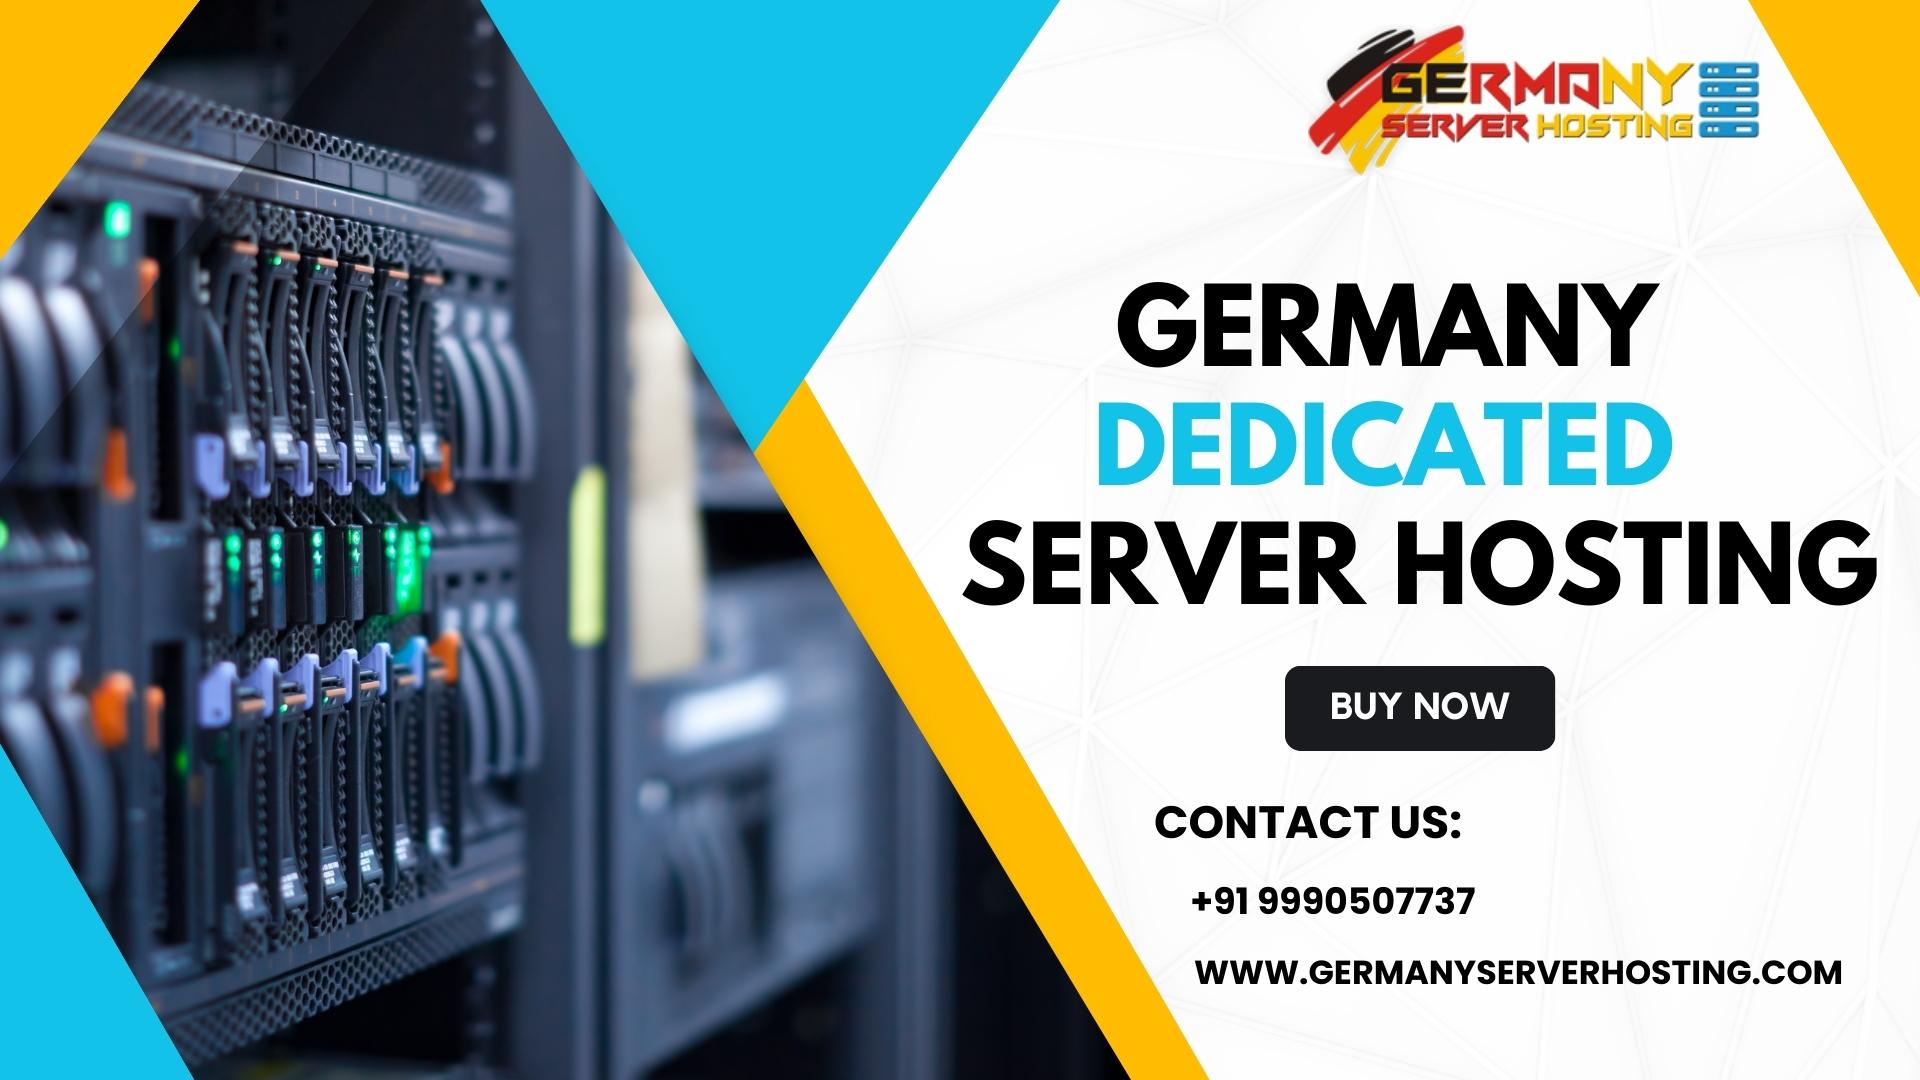 An array of powerful servers symbolizing Germany Dedicated Server Hosting. The cutting-edge infrastructure ensures reliability, speed, and optimal performance for websites and applications.